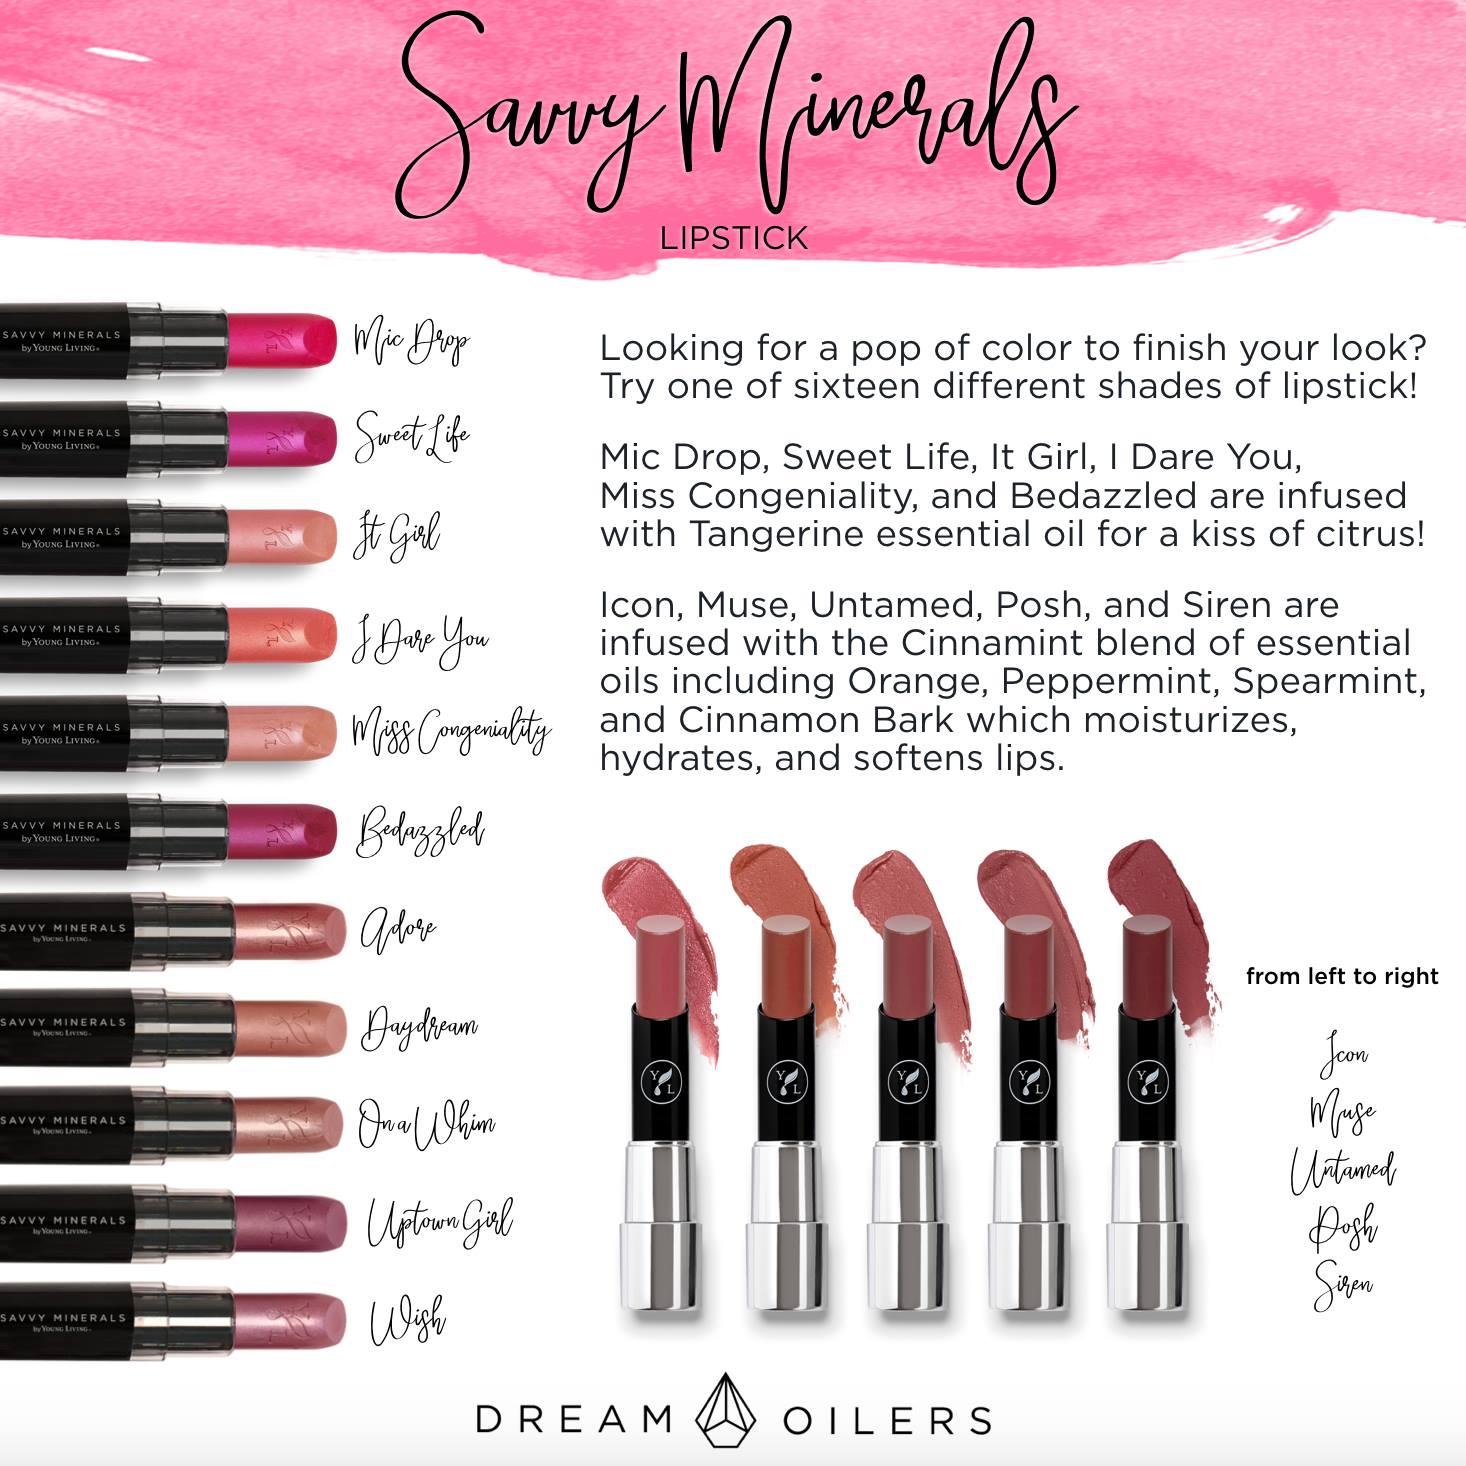 Savvy Minerals Makeup — Dream Oilers